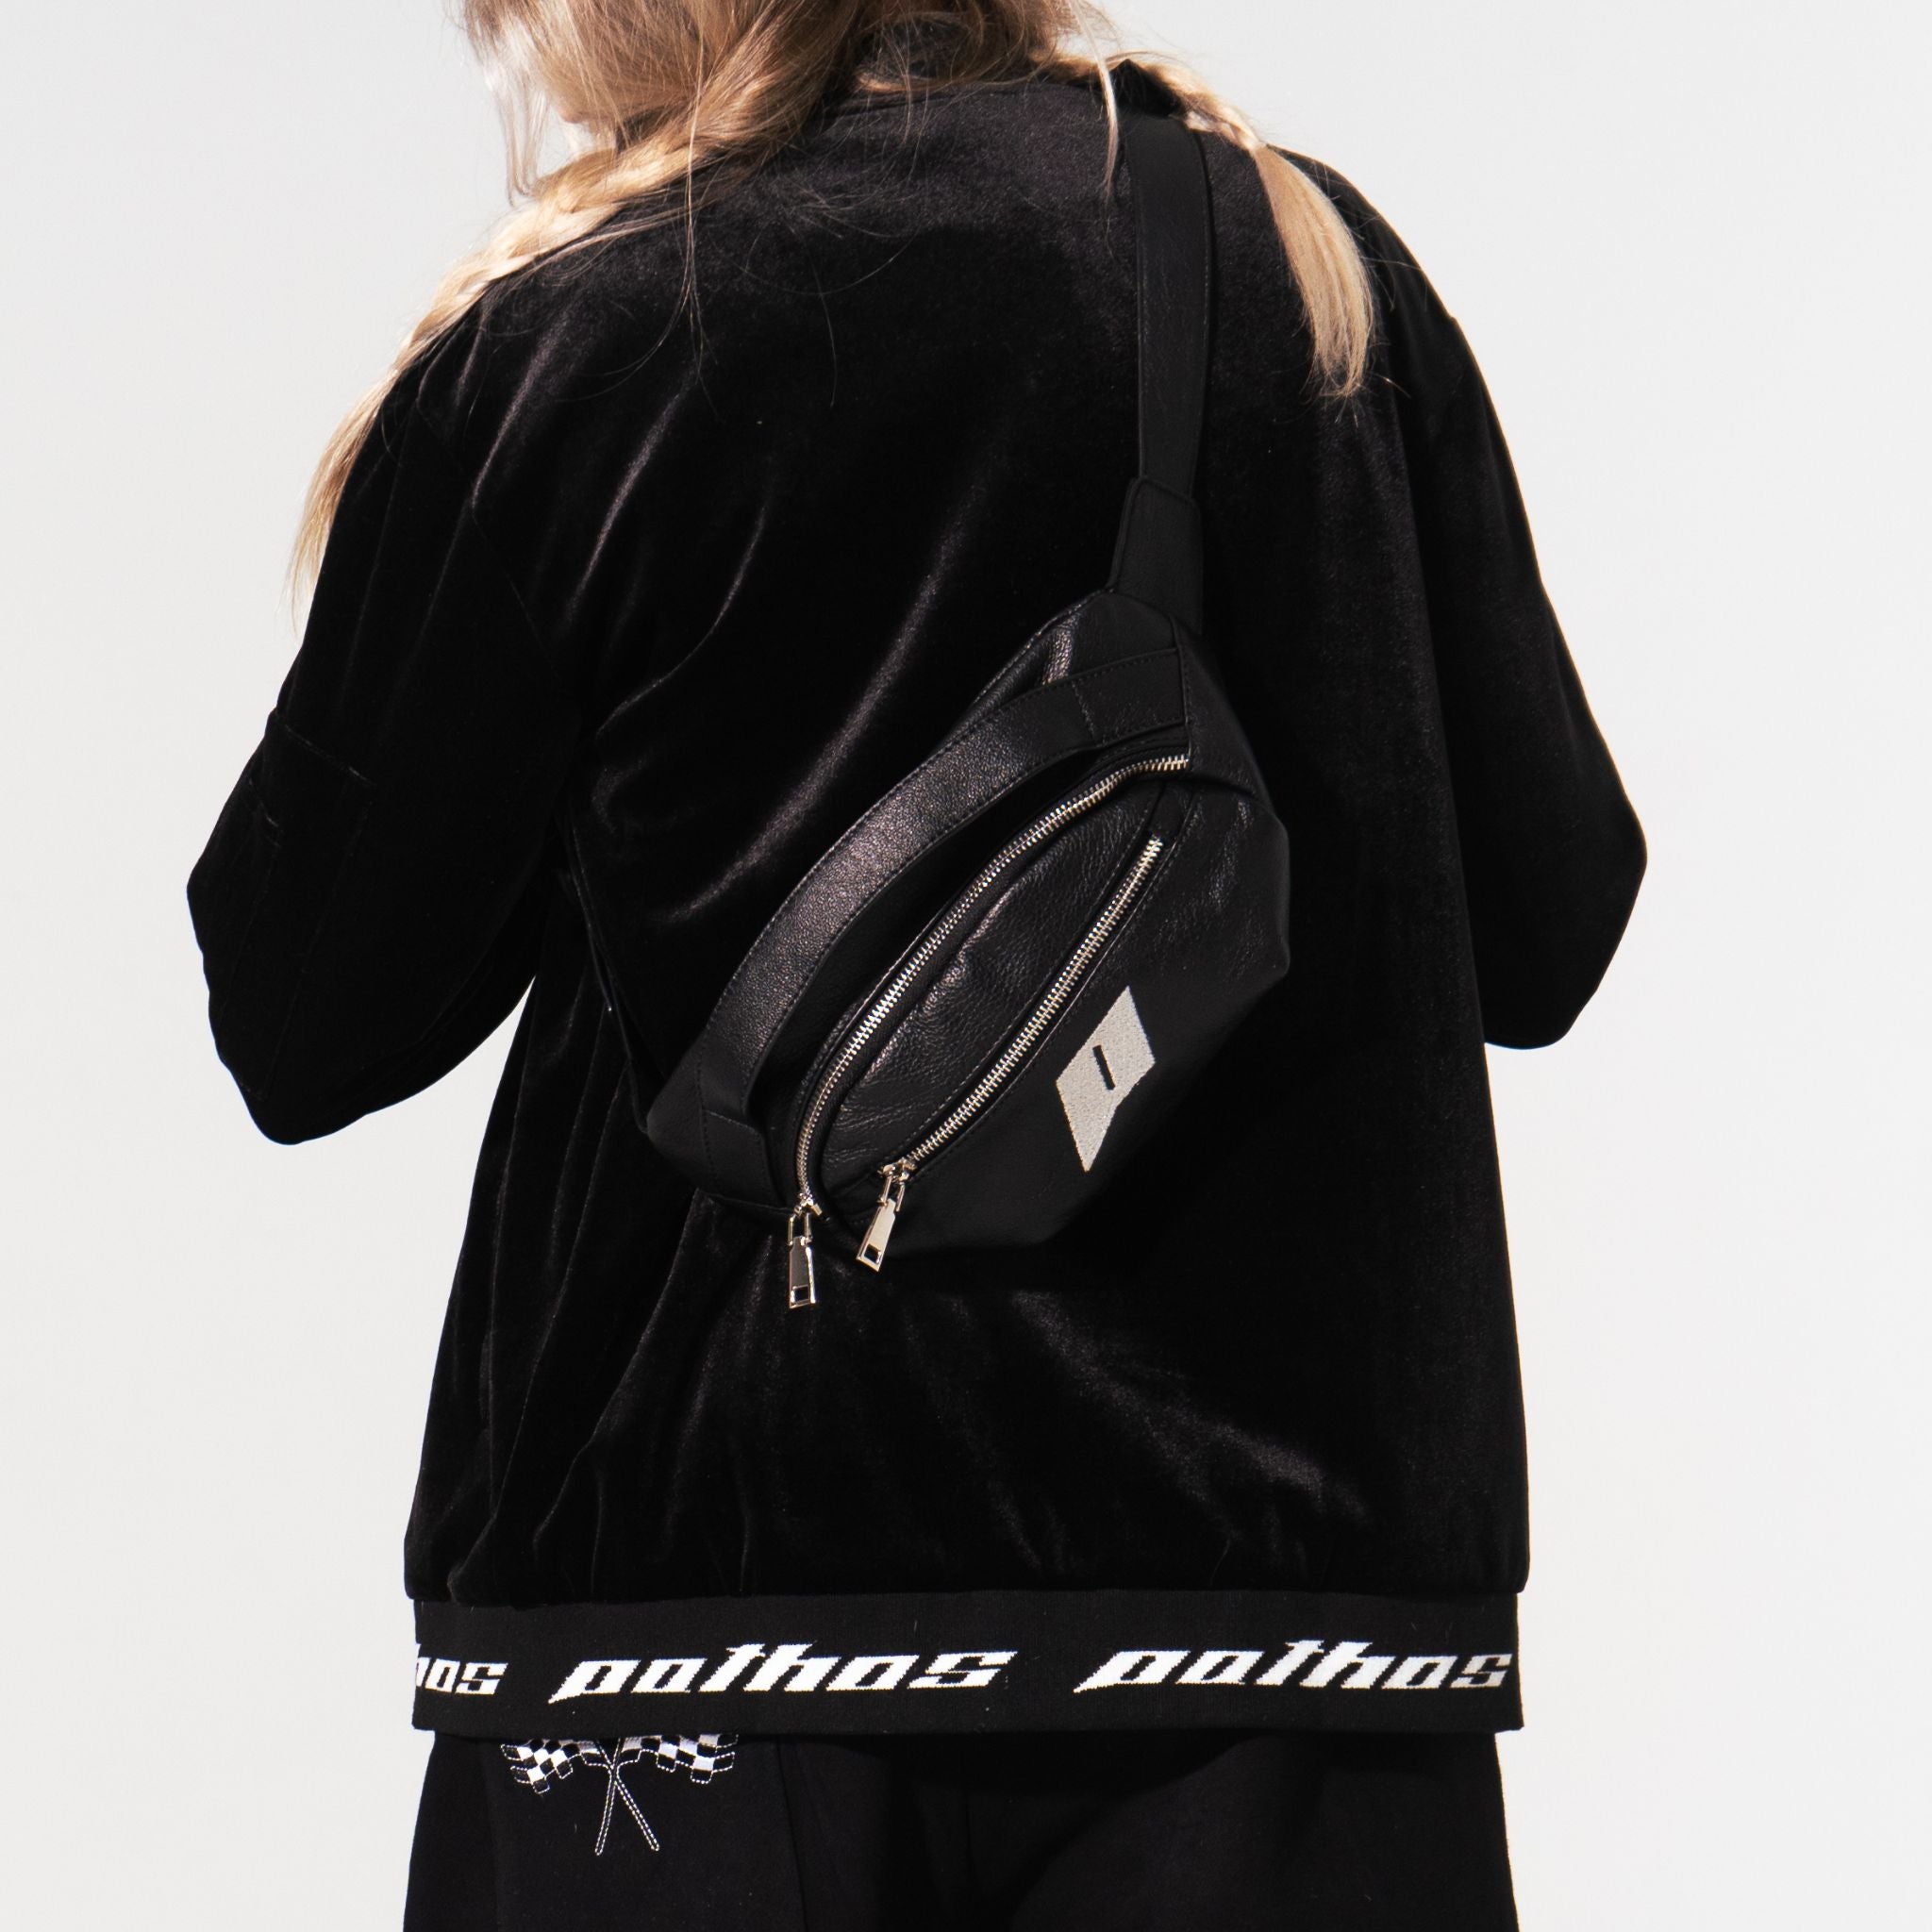  Leather Strap Bag - Pathos Of Things